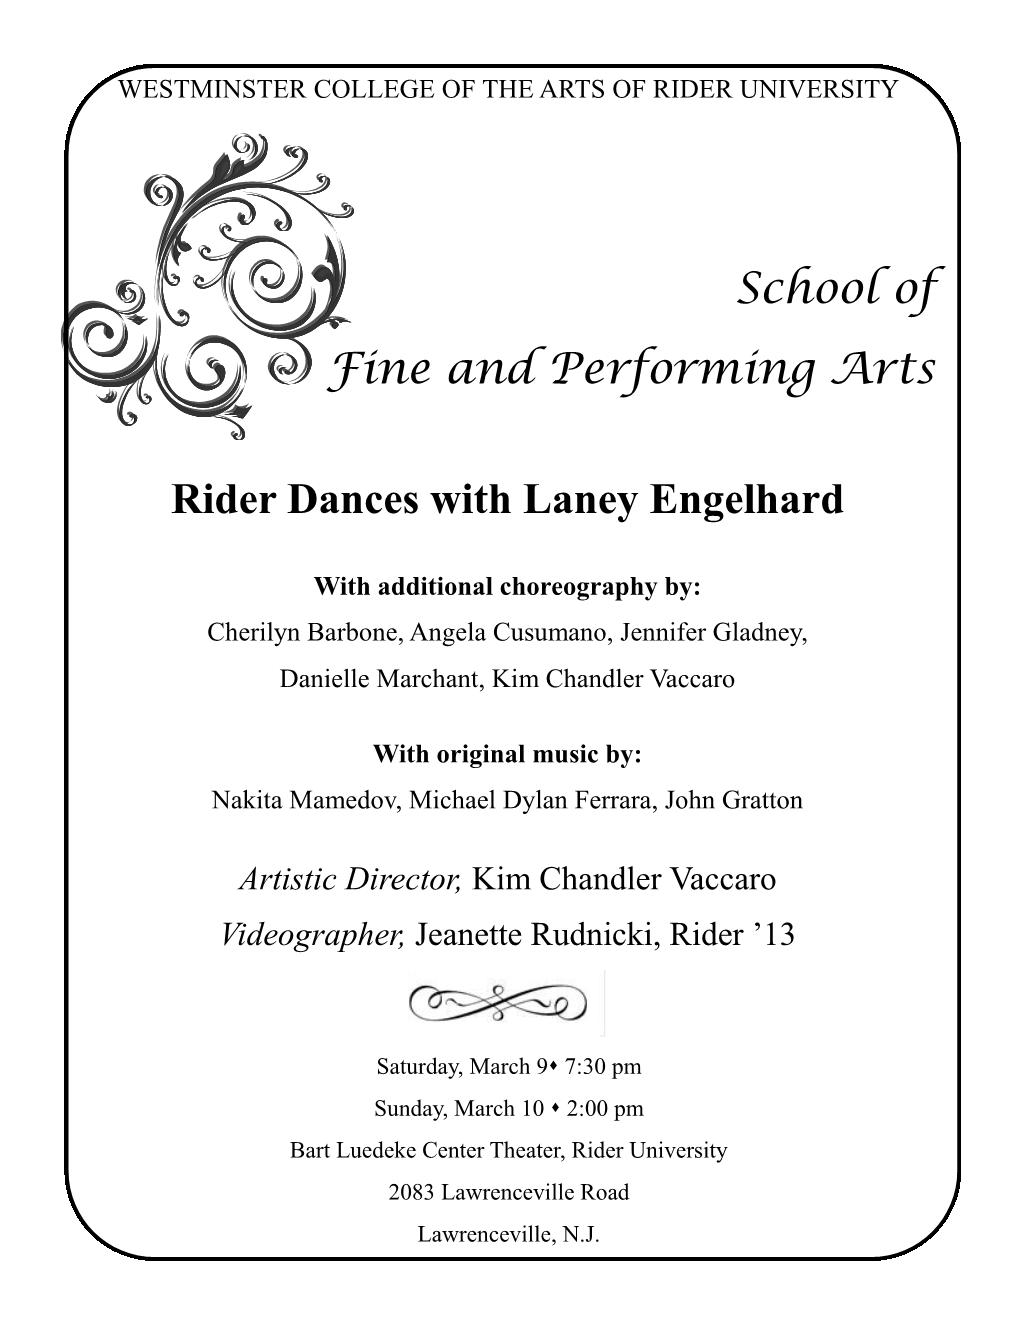 School of Fine and Performing Arts Rider Dances with Laney Engelhard